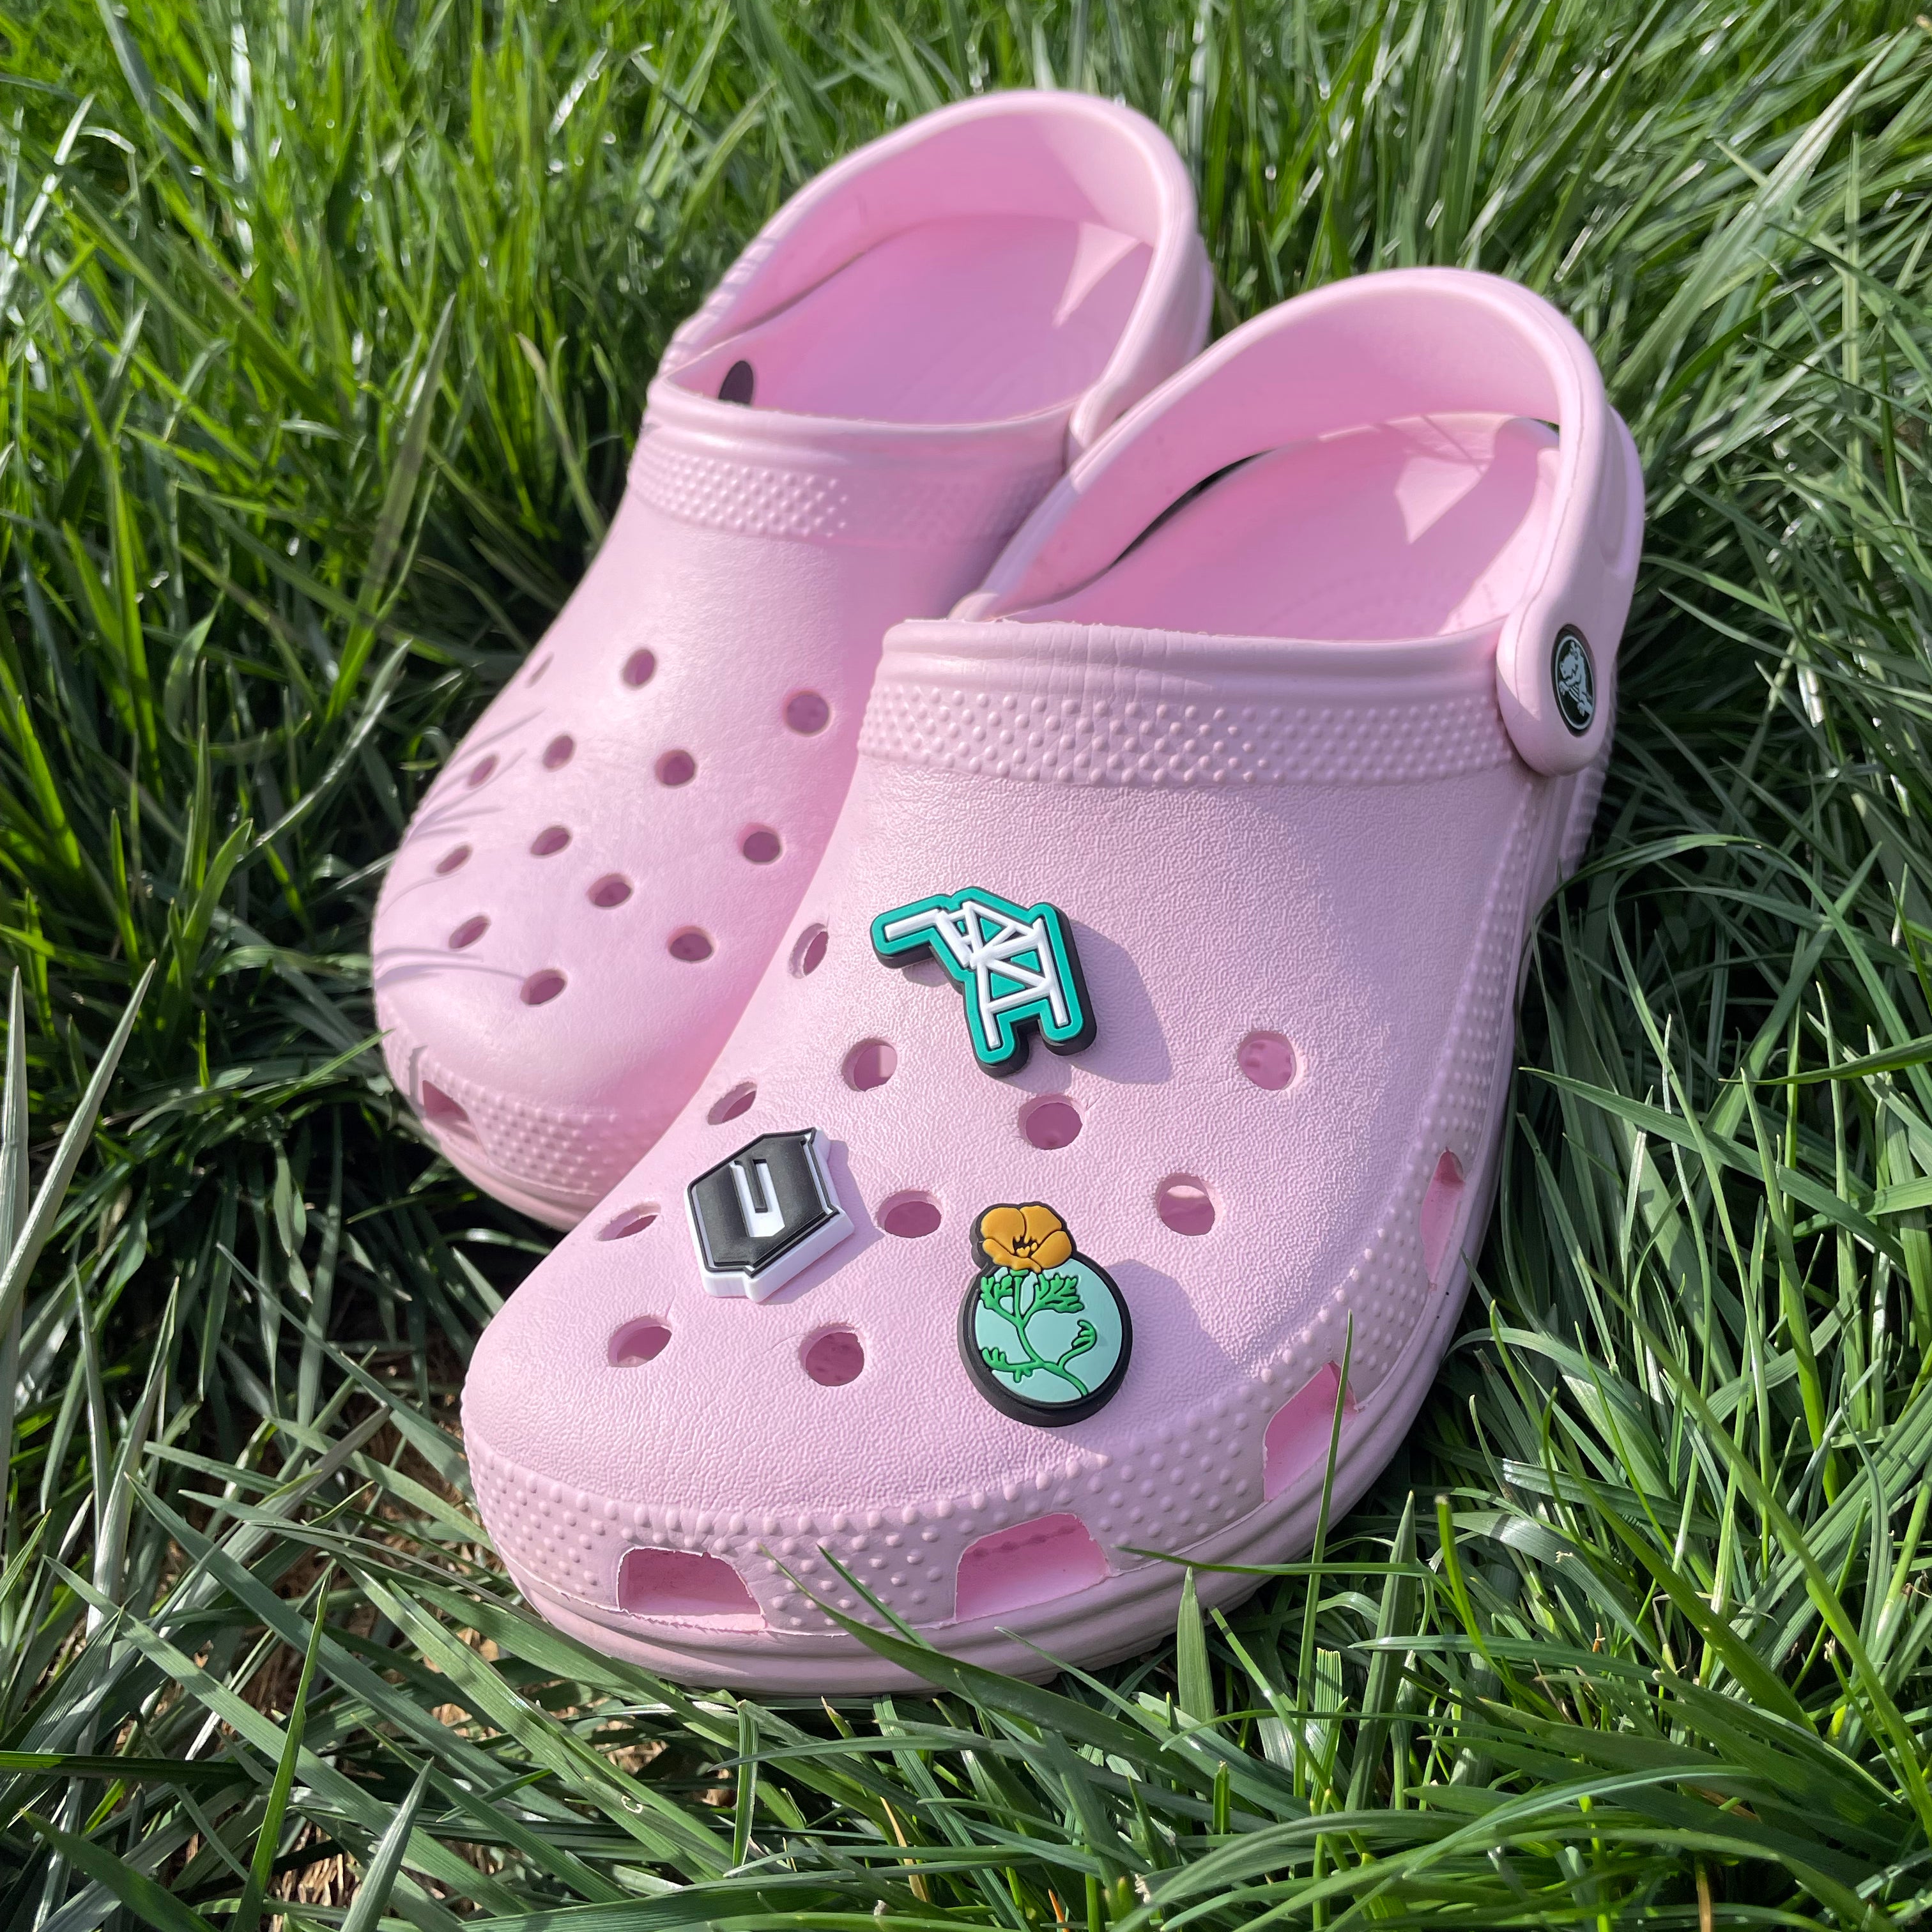 A pair of pink croc clogs on grass. The front one has three shoe charms - Cranes, California Poppy and Oaklandish O.